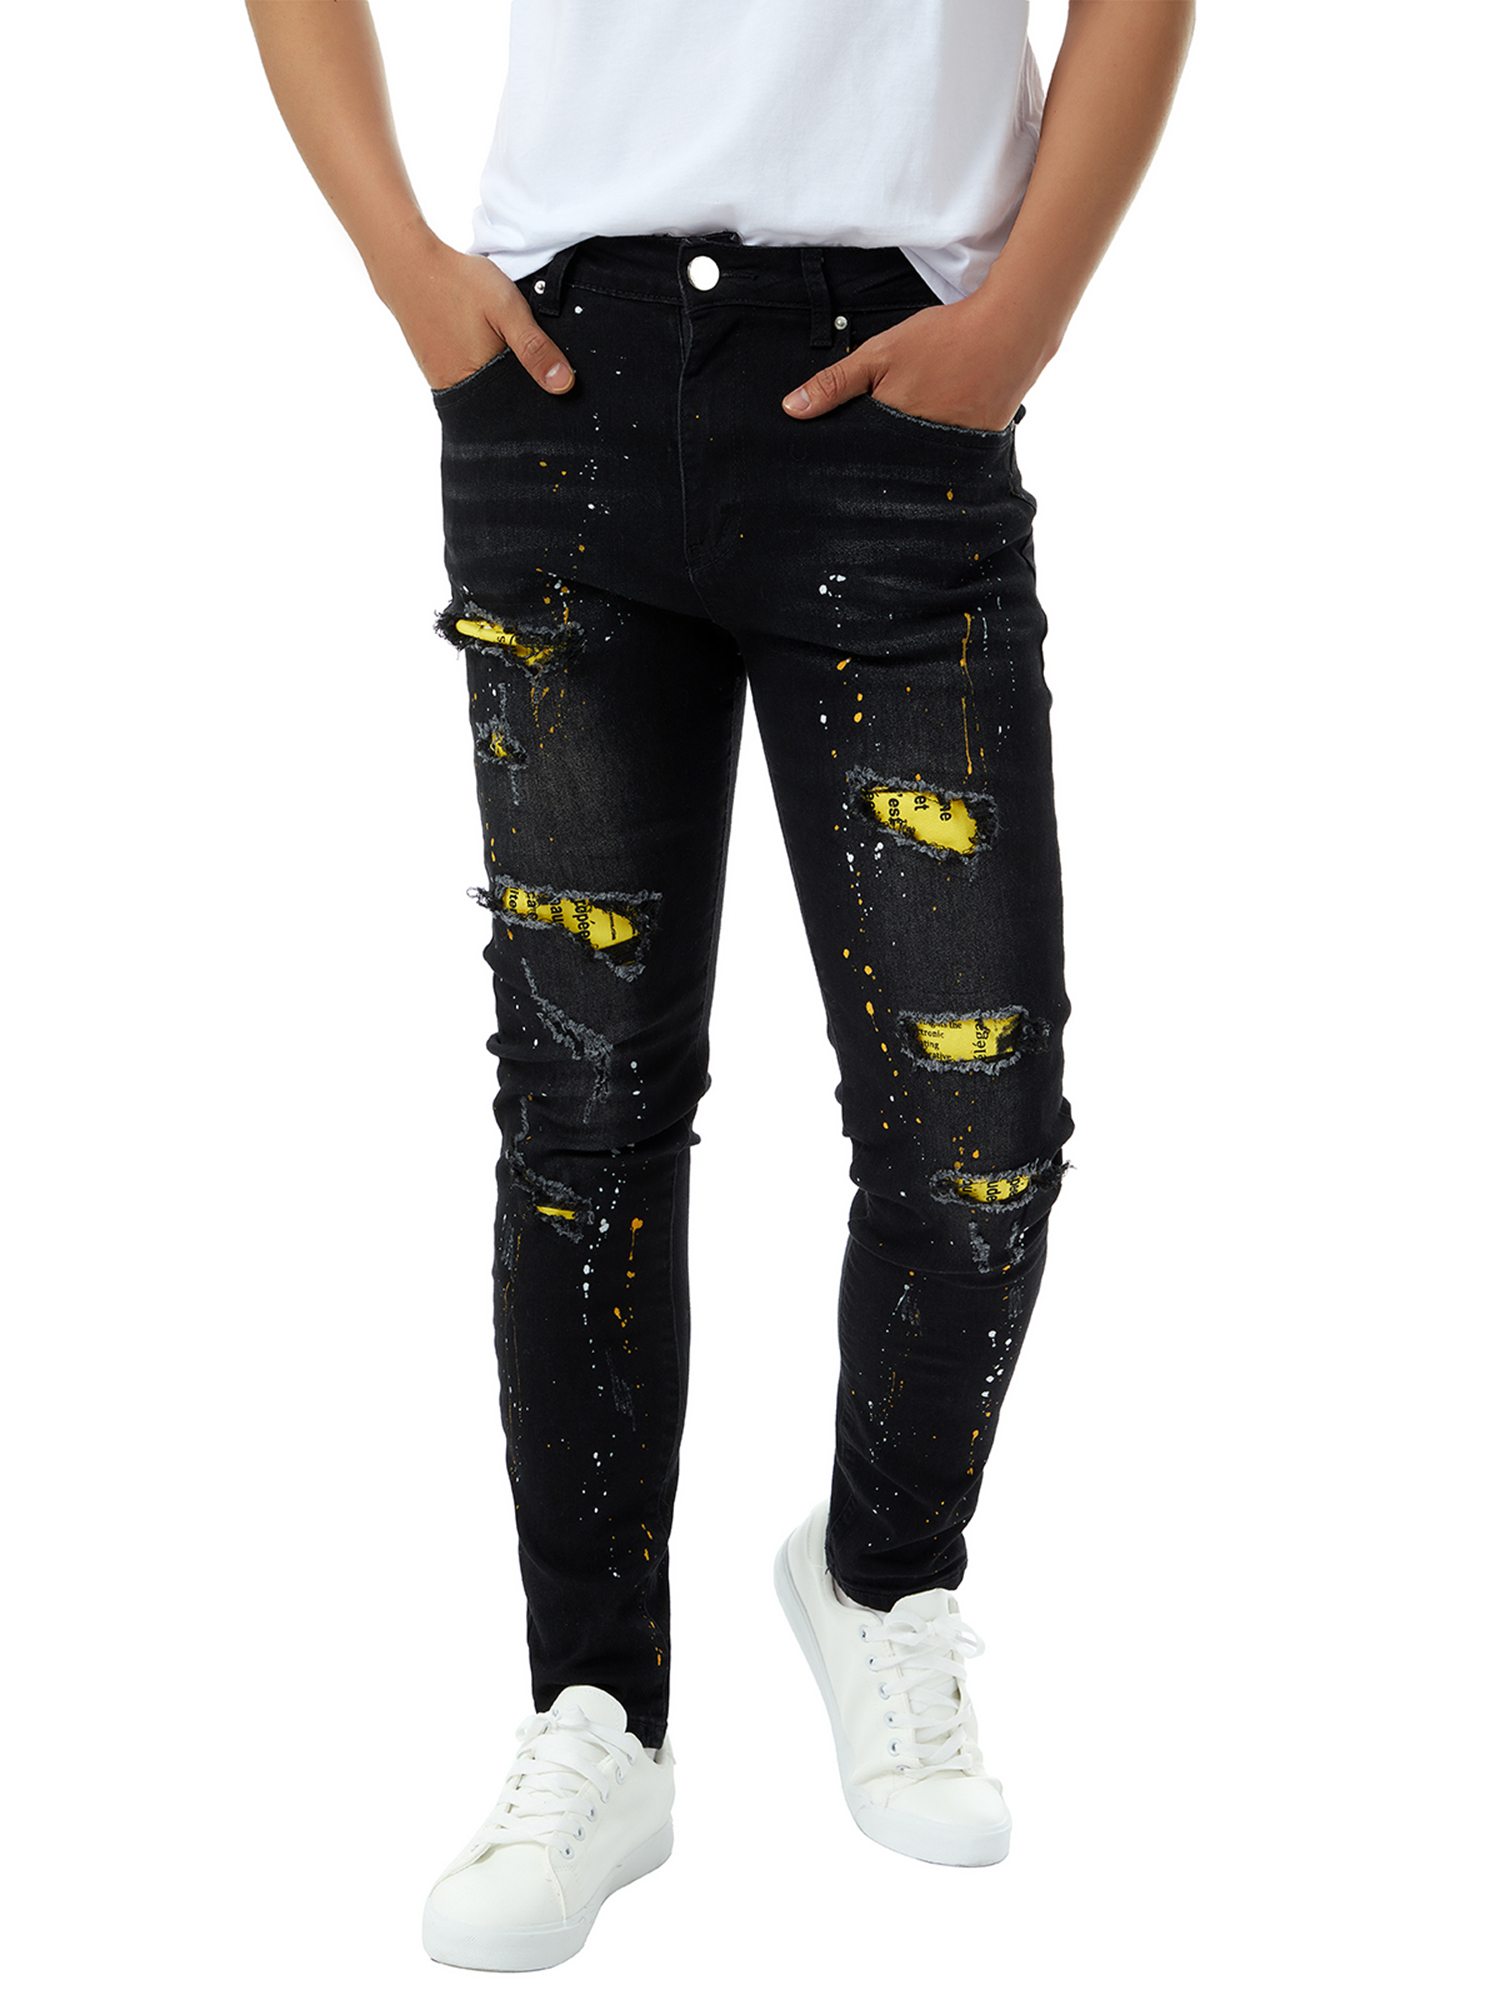 Men Casual Slim Fit Denim Jeans Skinny Distressed Jeans Trousers Motorcycle Rider Hole Pants Jeans - image 1 of 6